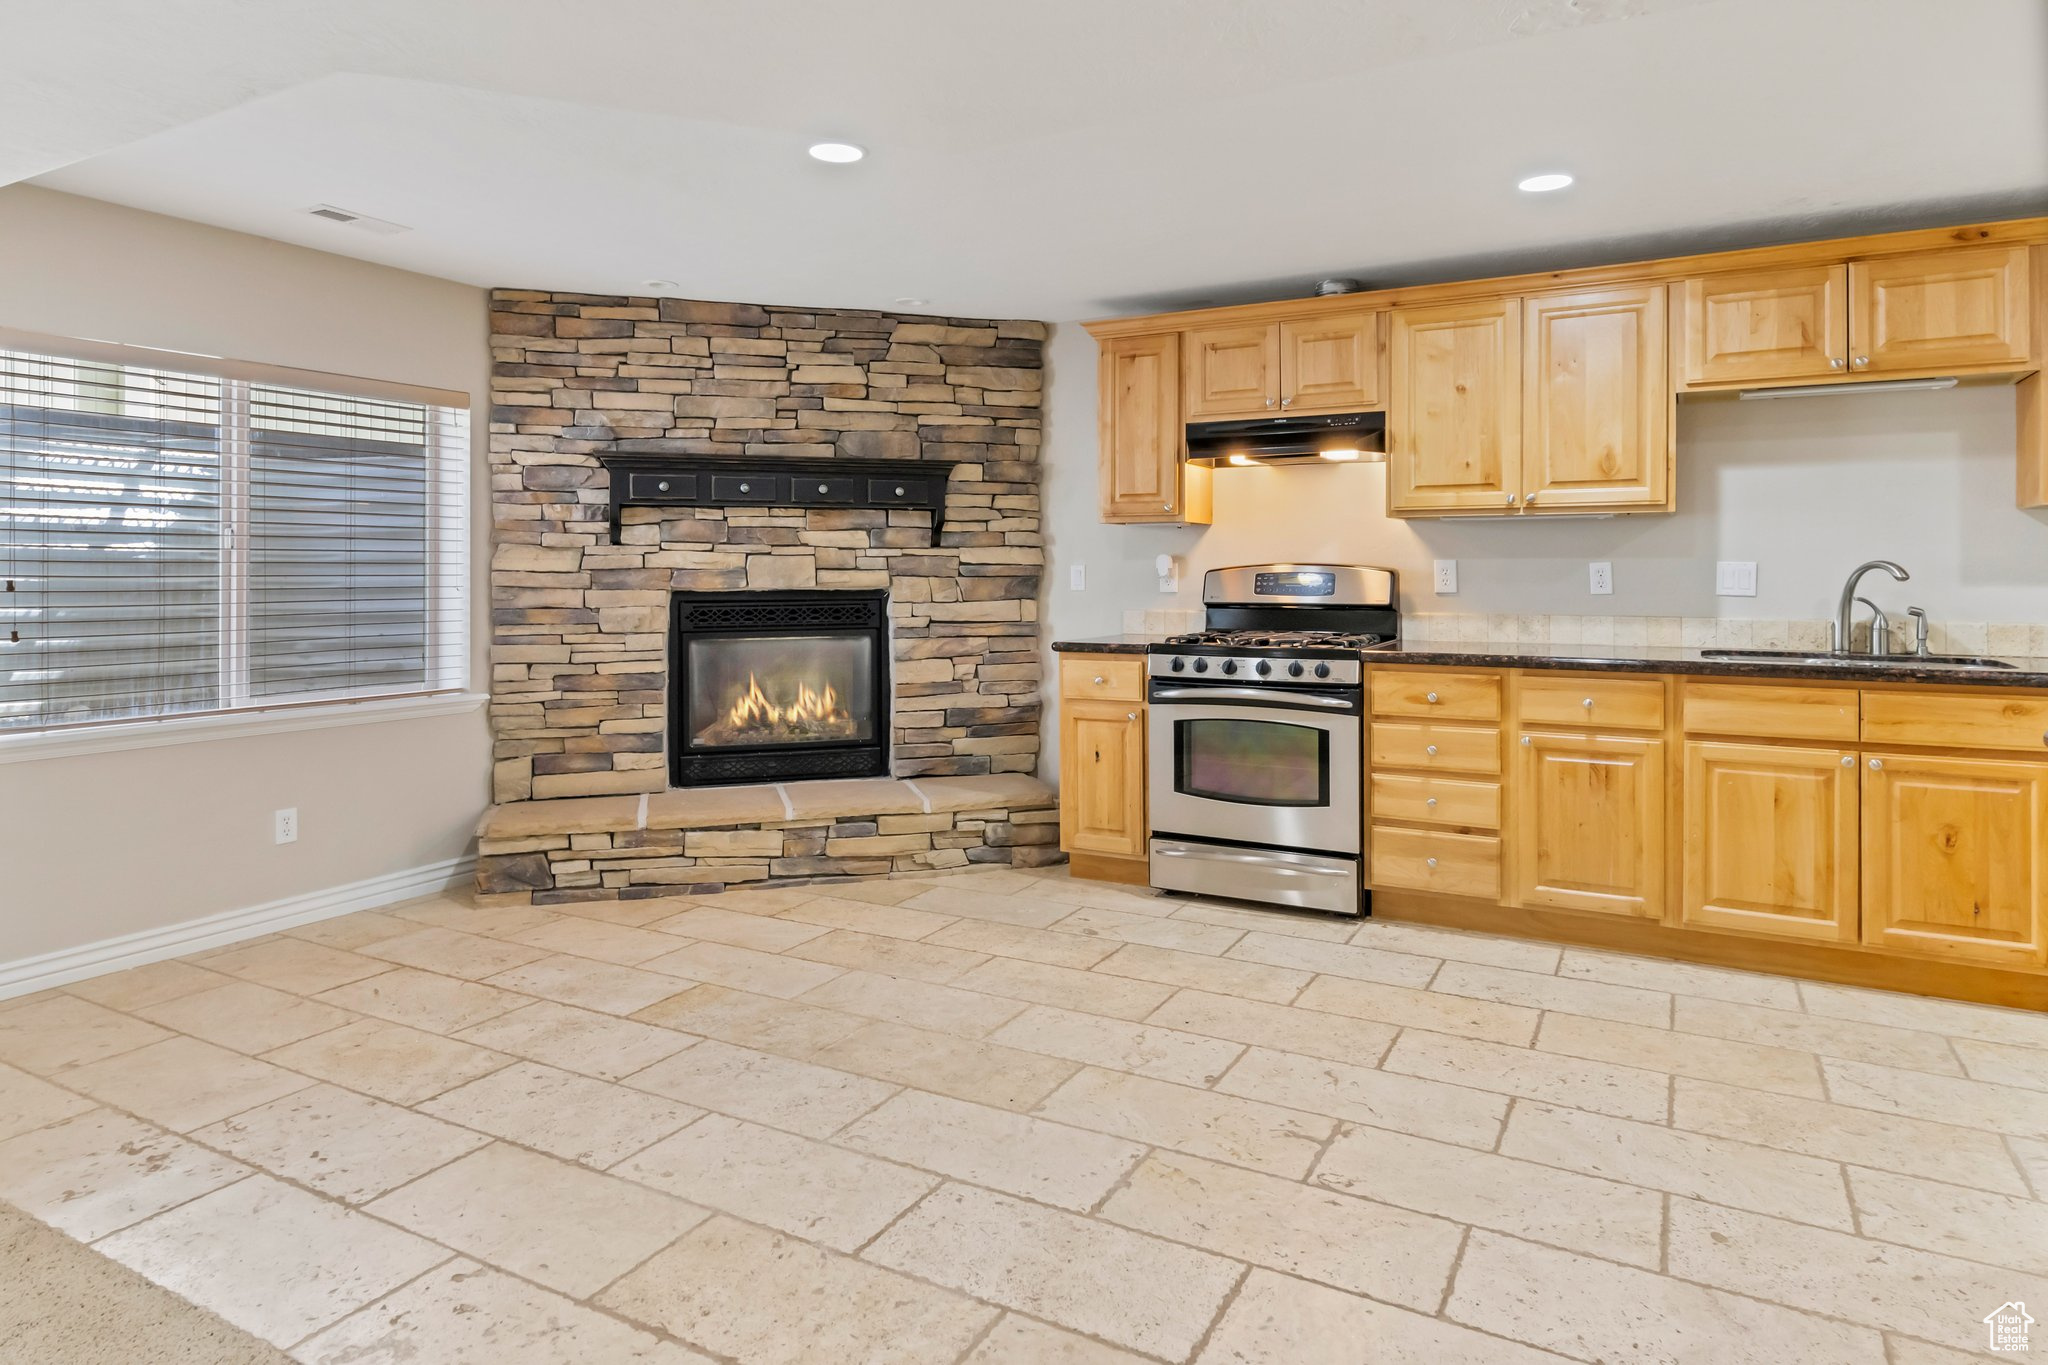 Kitchen with sink, a stone fireplace, light tile flooring, dark stone counters, and stainless steel gas stove